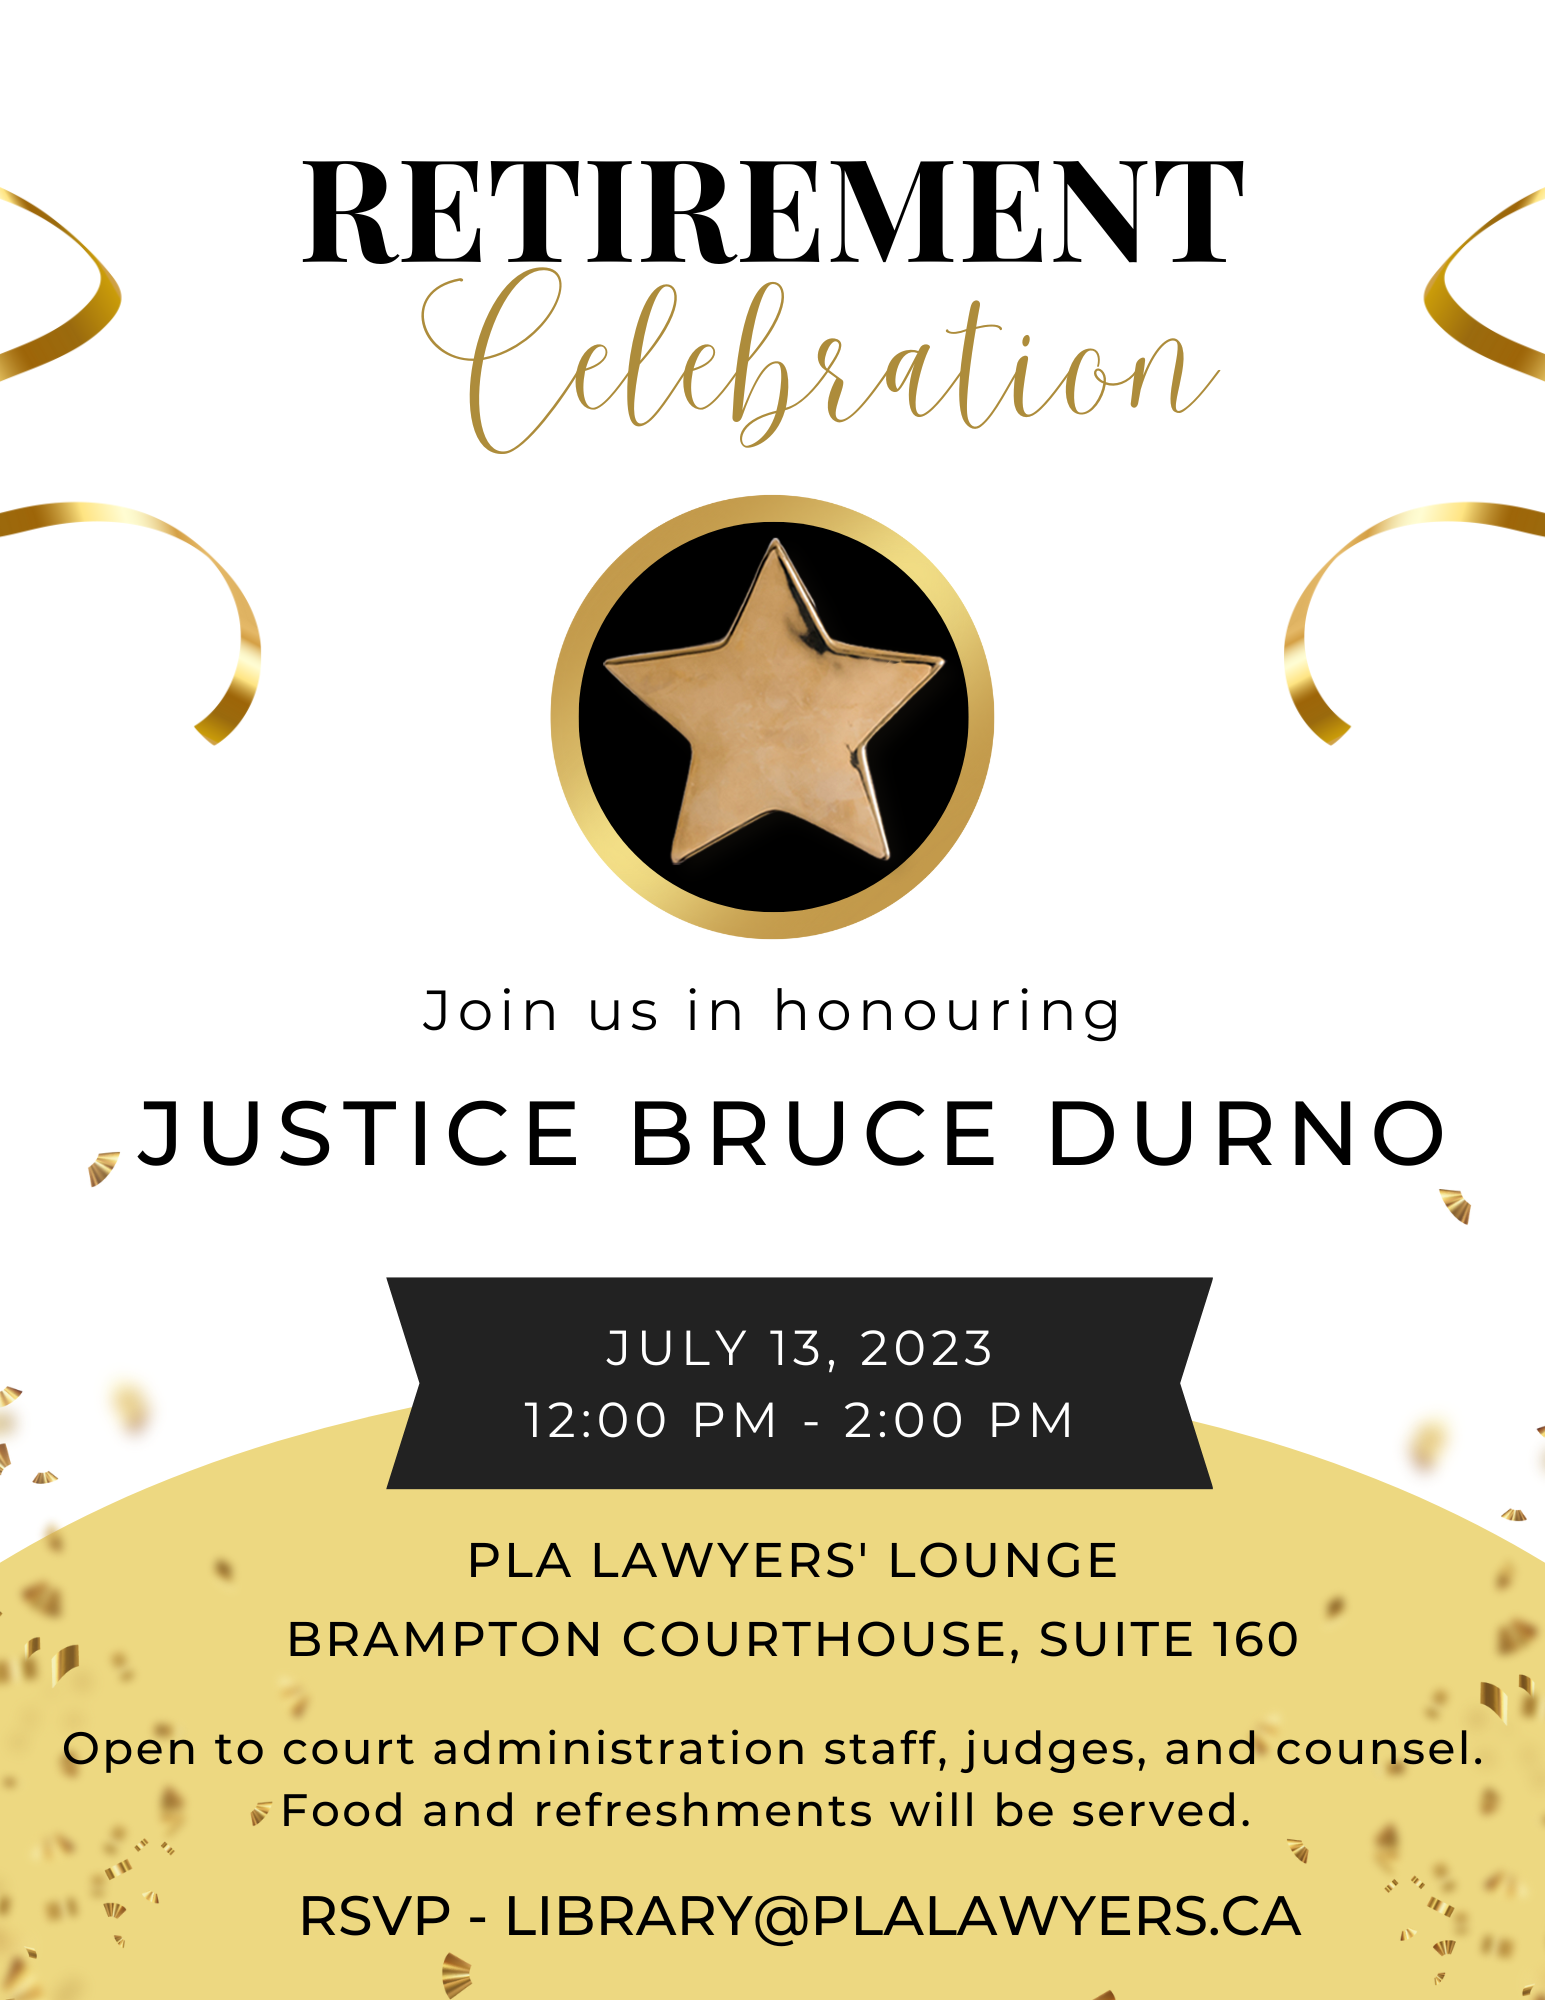 Image of flyer for a PLA event, Justice Durno's retirement celebration. The event will take place in t he PLA Lounge on July 23, 2023 from 12:00 PM to 2:00 PM. Please RSVP to library@plalawyers.ca if you plan to attend. This event is open to court administration staff, judges and counsel. Food and refreshments will be served.